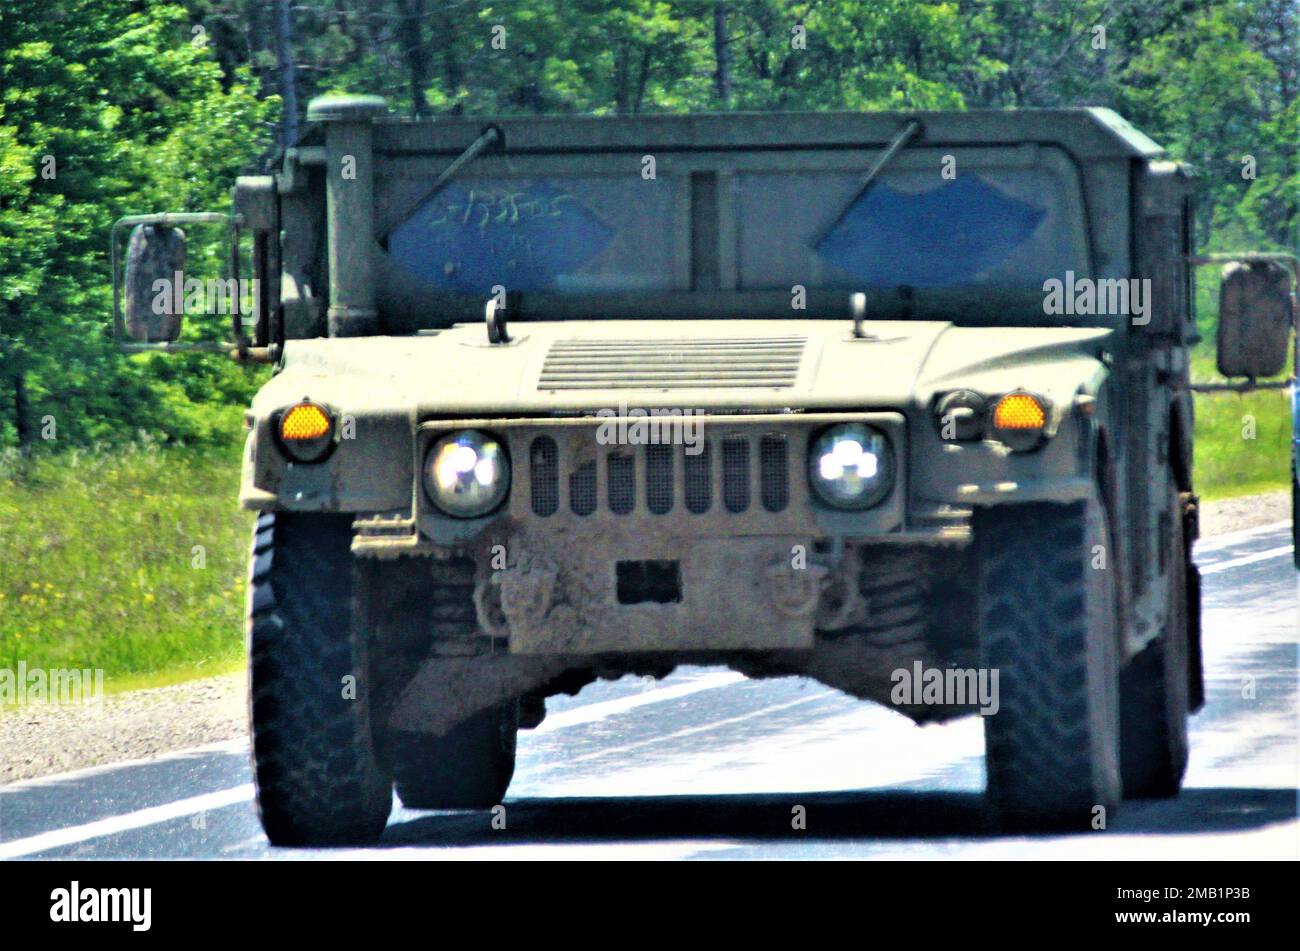 Service members at the installation for training drive a military vehicle on post June 9, 2022, at Fort McCoy, Wis. Annually, tens of thousands of troops complete institutional and transient troop training operations at Fort McCoy. During June 2022, thousands of troops also trained at Fort McCoy, including troops from the Wisconsin National Guard and Iowa National Guard. Stock Photo